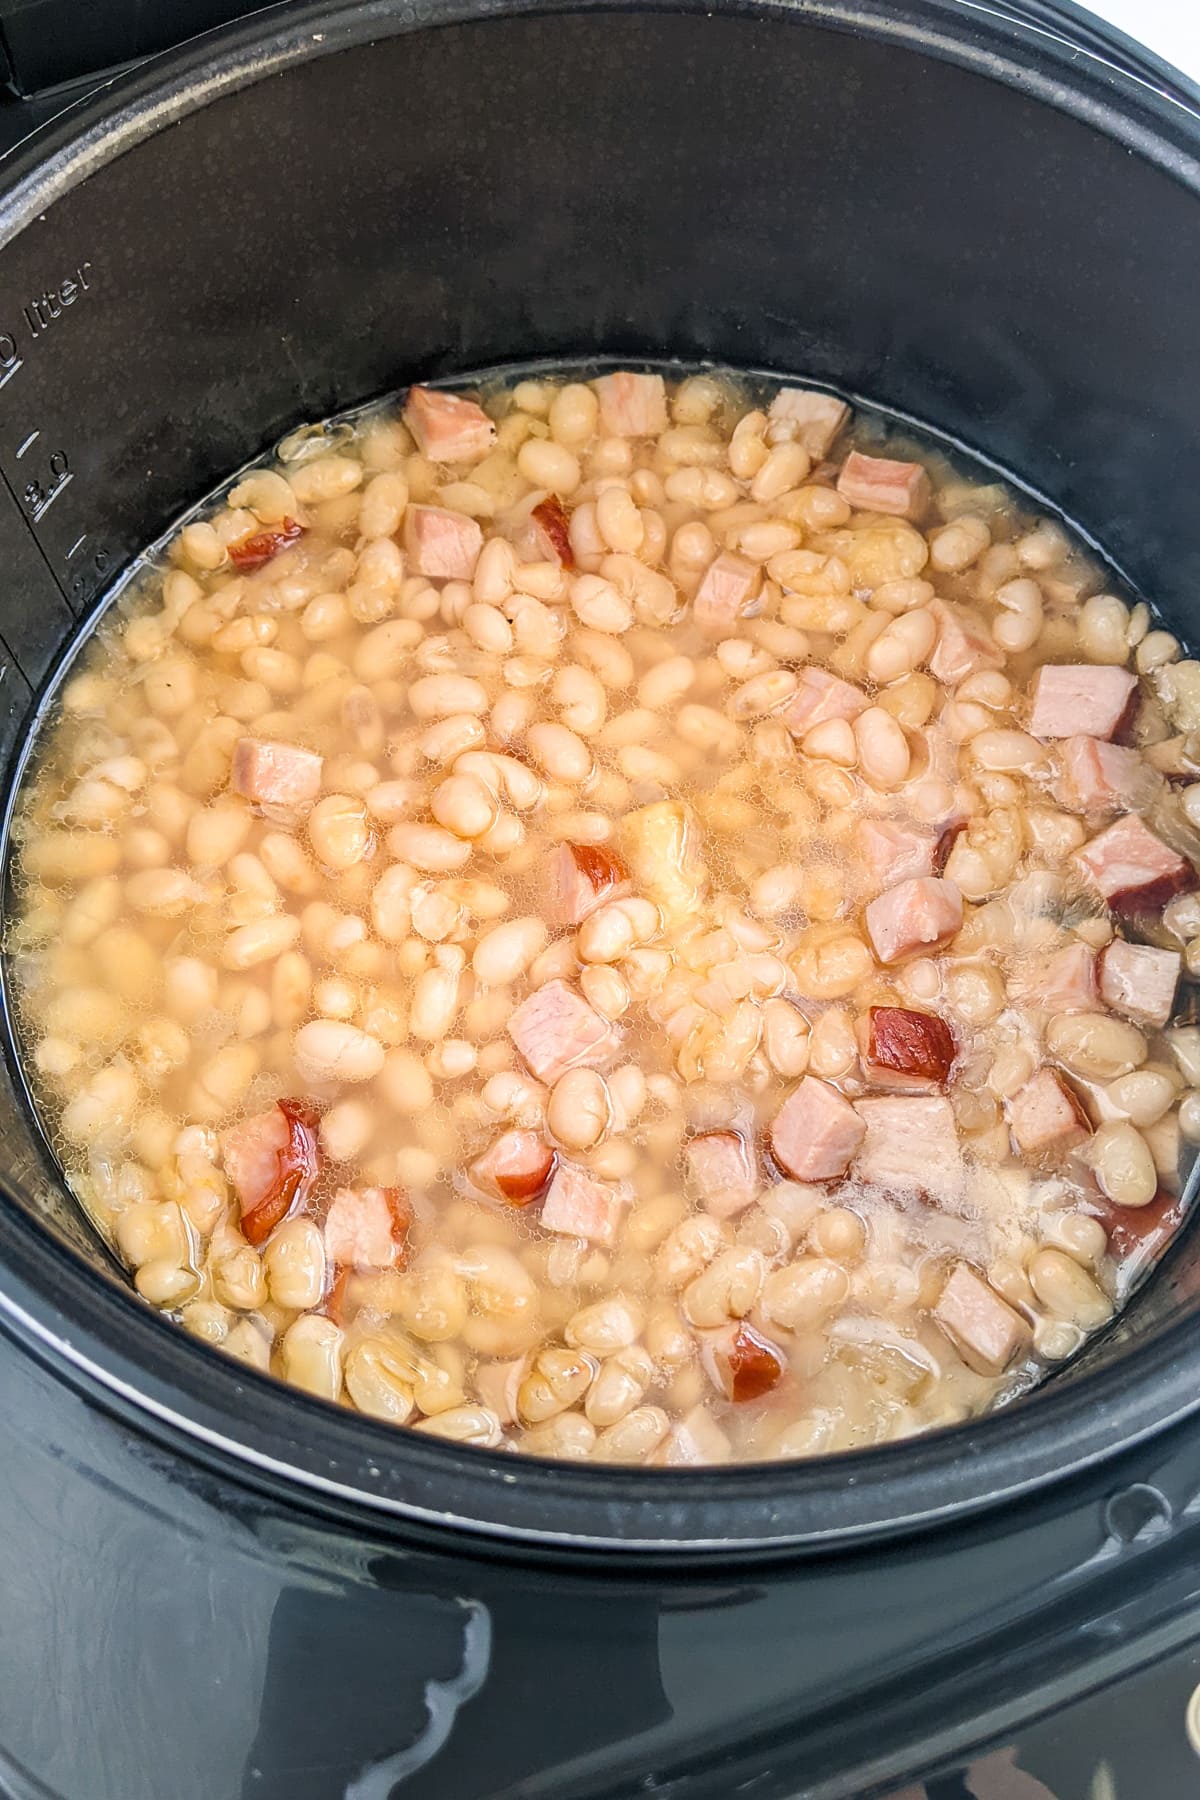 Cooked ham and beans stew in a slow cooker.